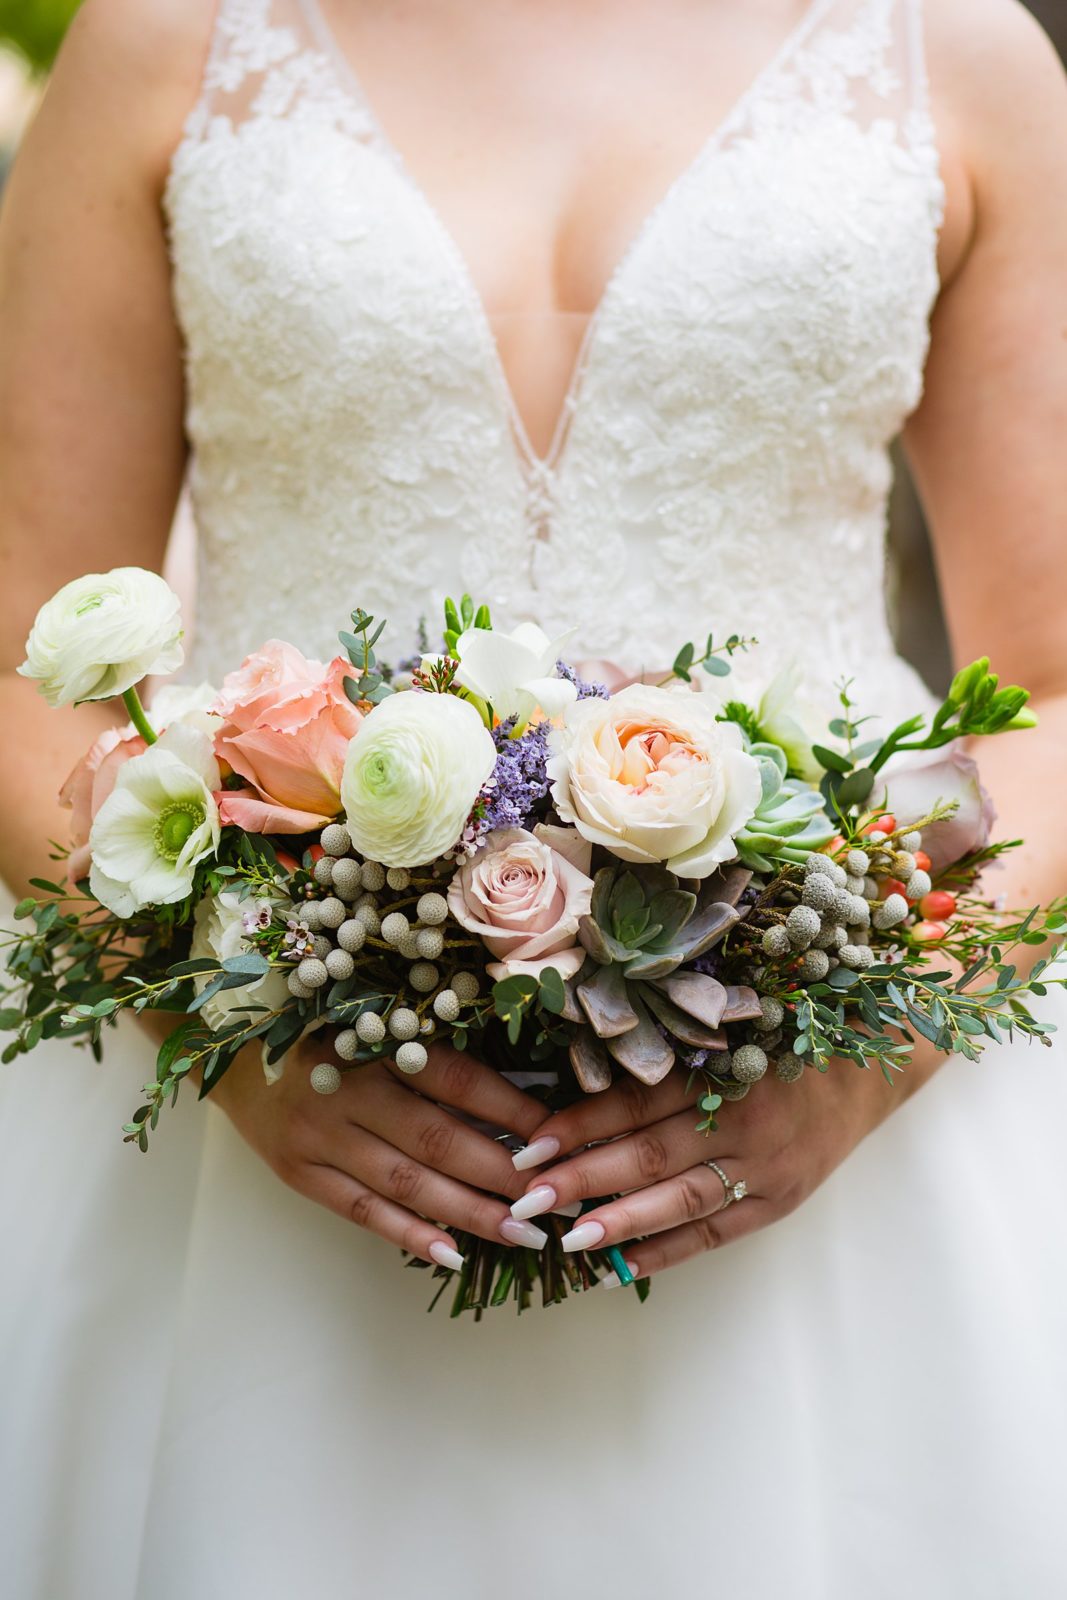 Bride's tight and wild bridal bouquet with pink and white flowers and succulents by PMA Photography.